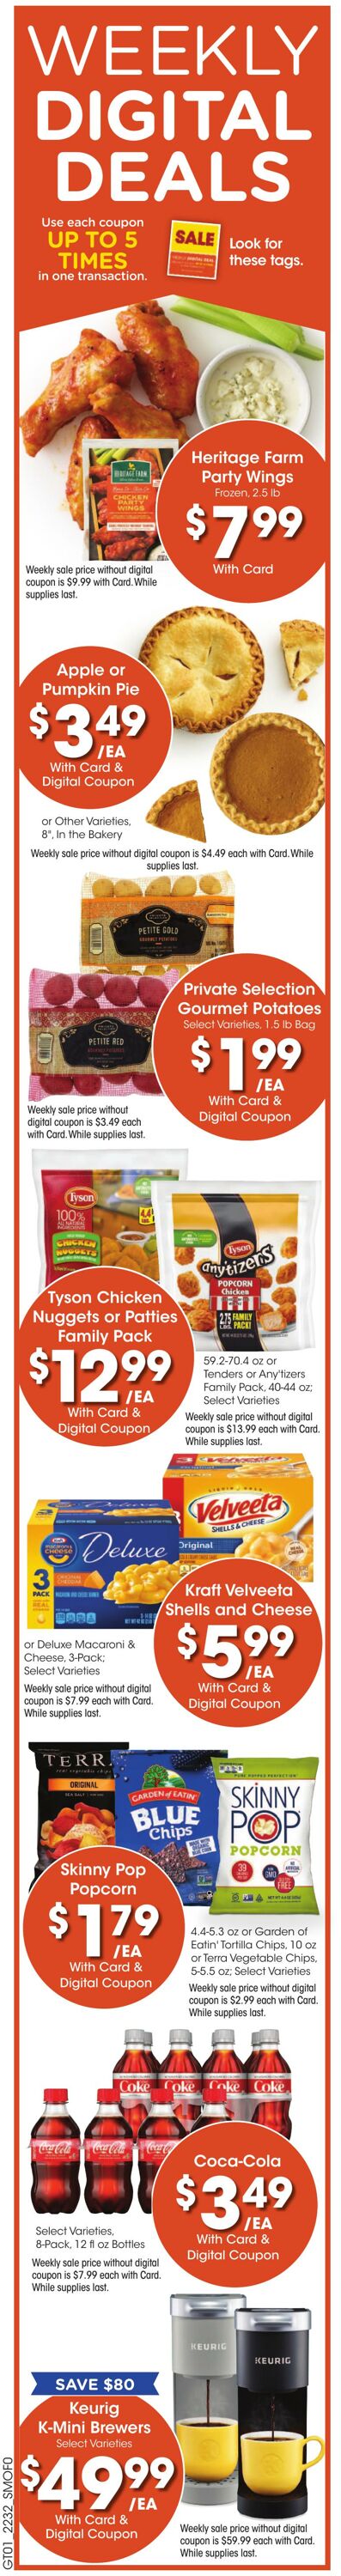 Weekly ad Smith’s Food and Drug 09/07/2022 - 09/13/2022